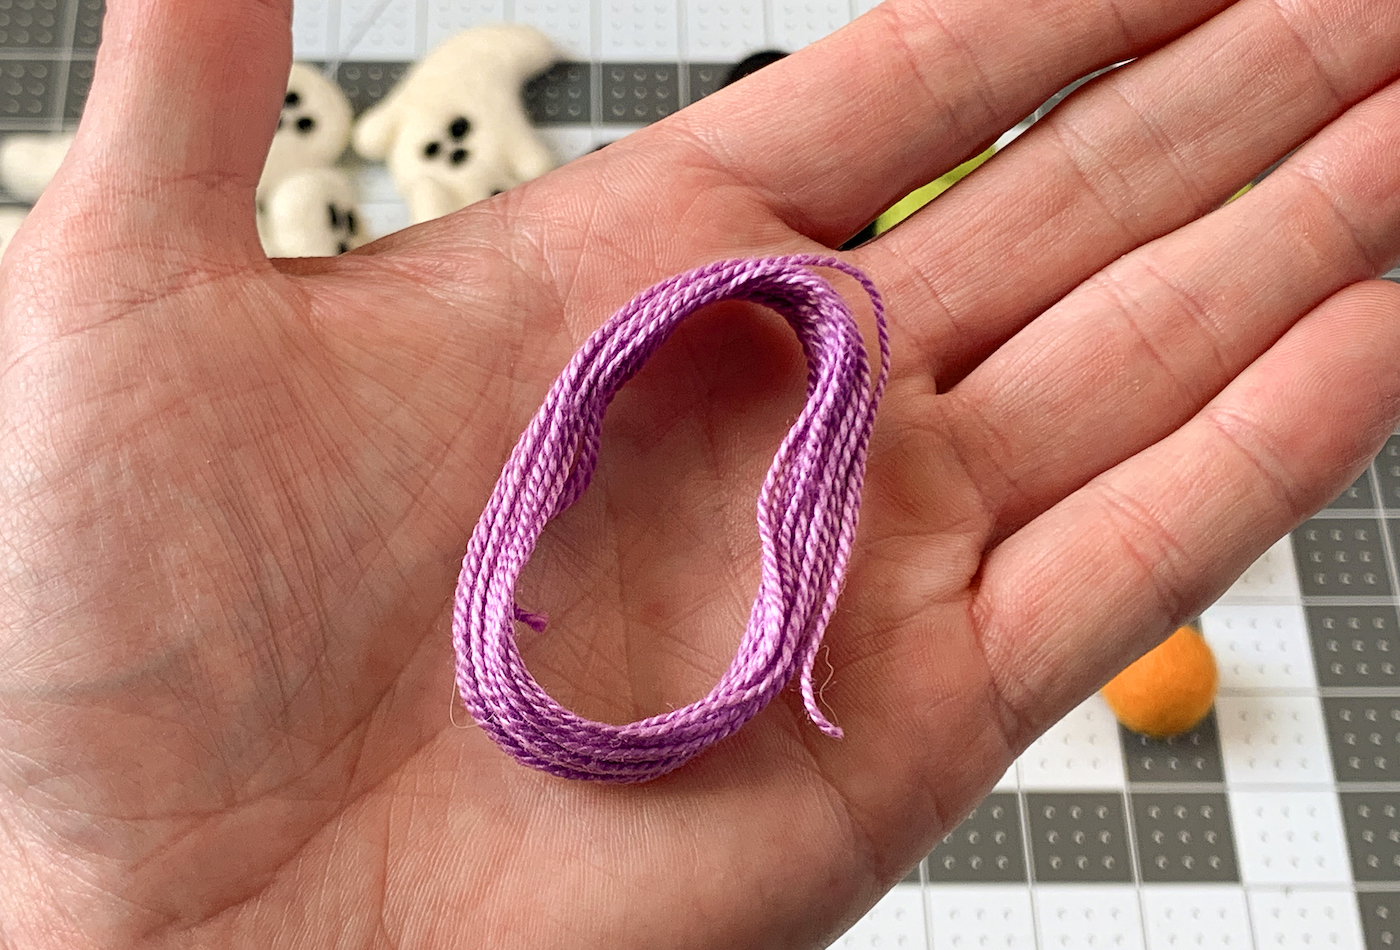 Hand holding purple embroidery floss